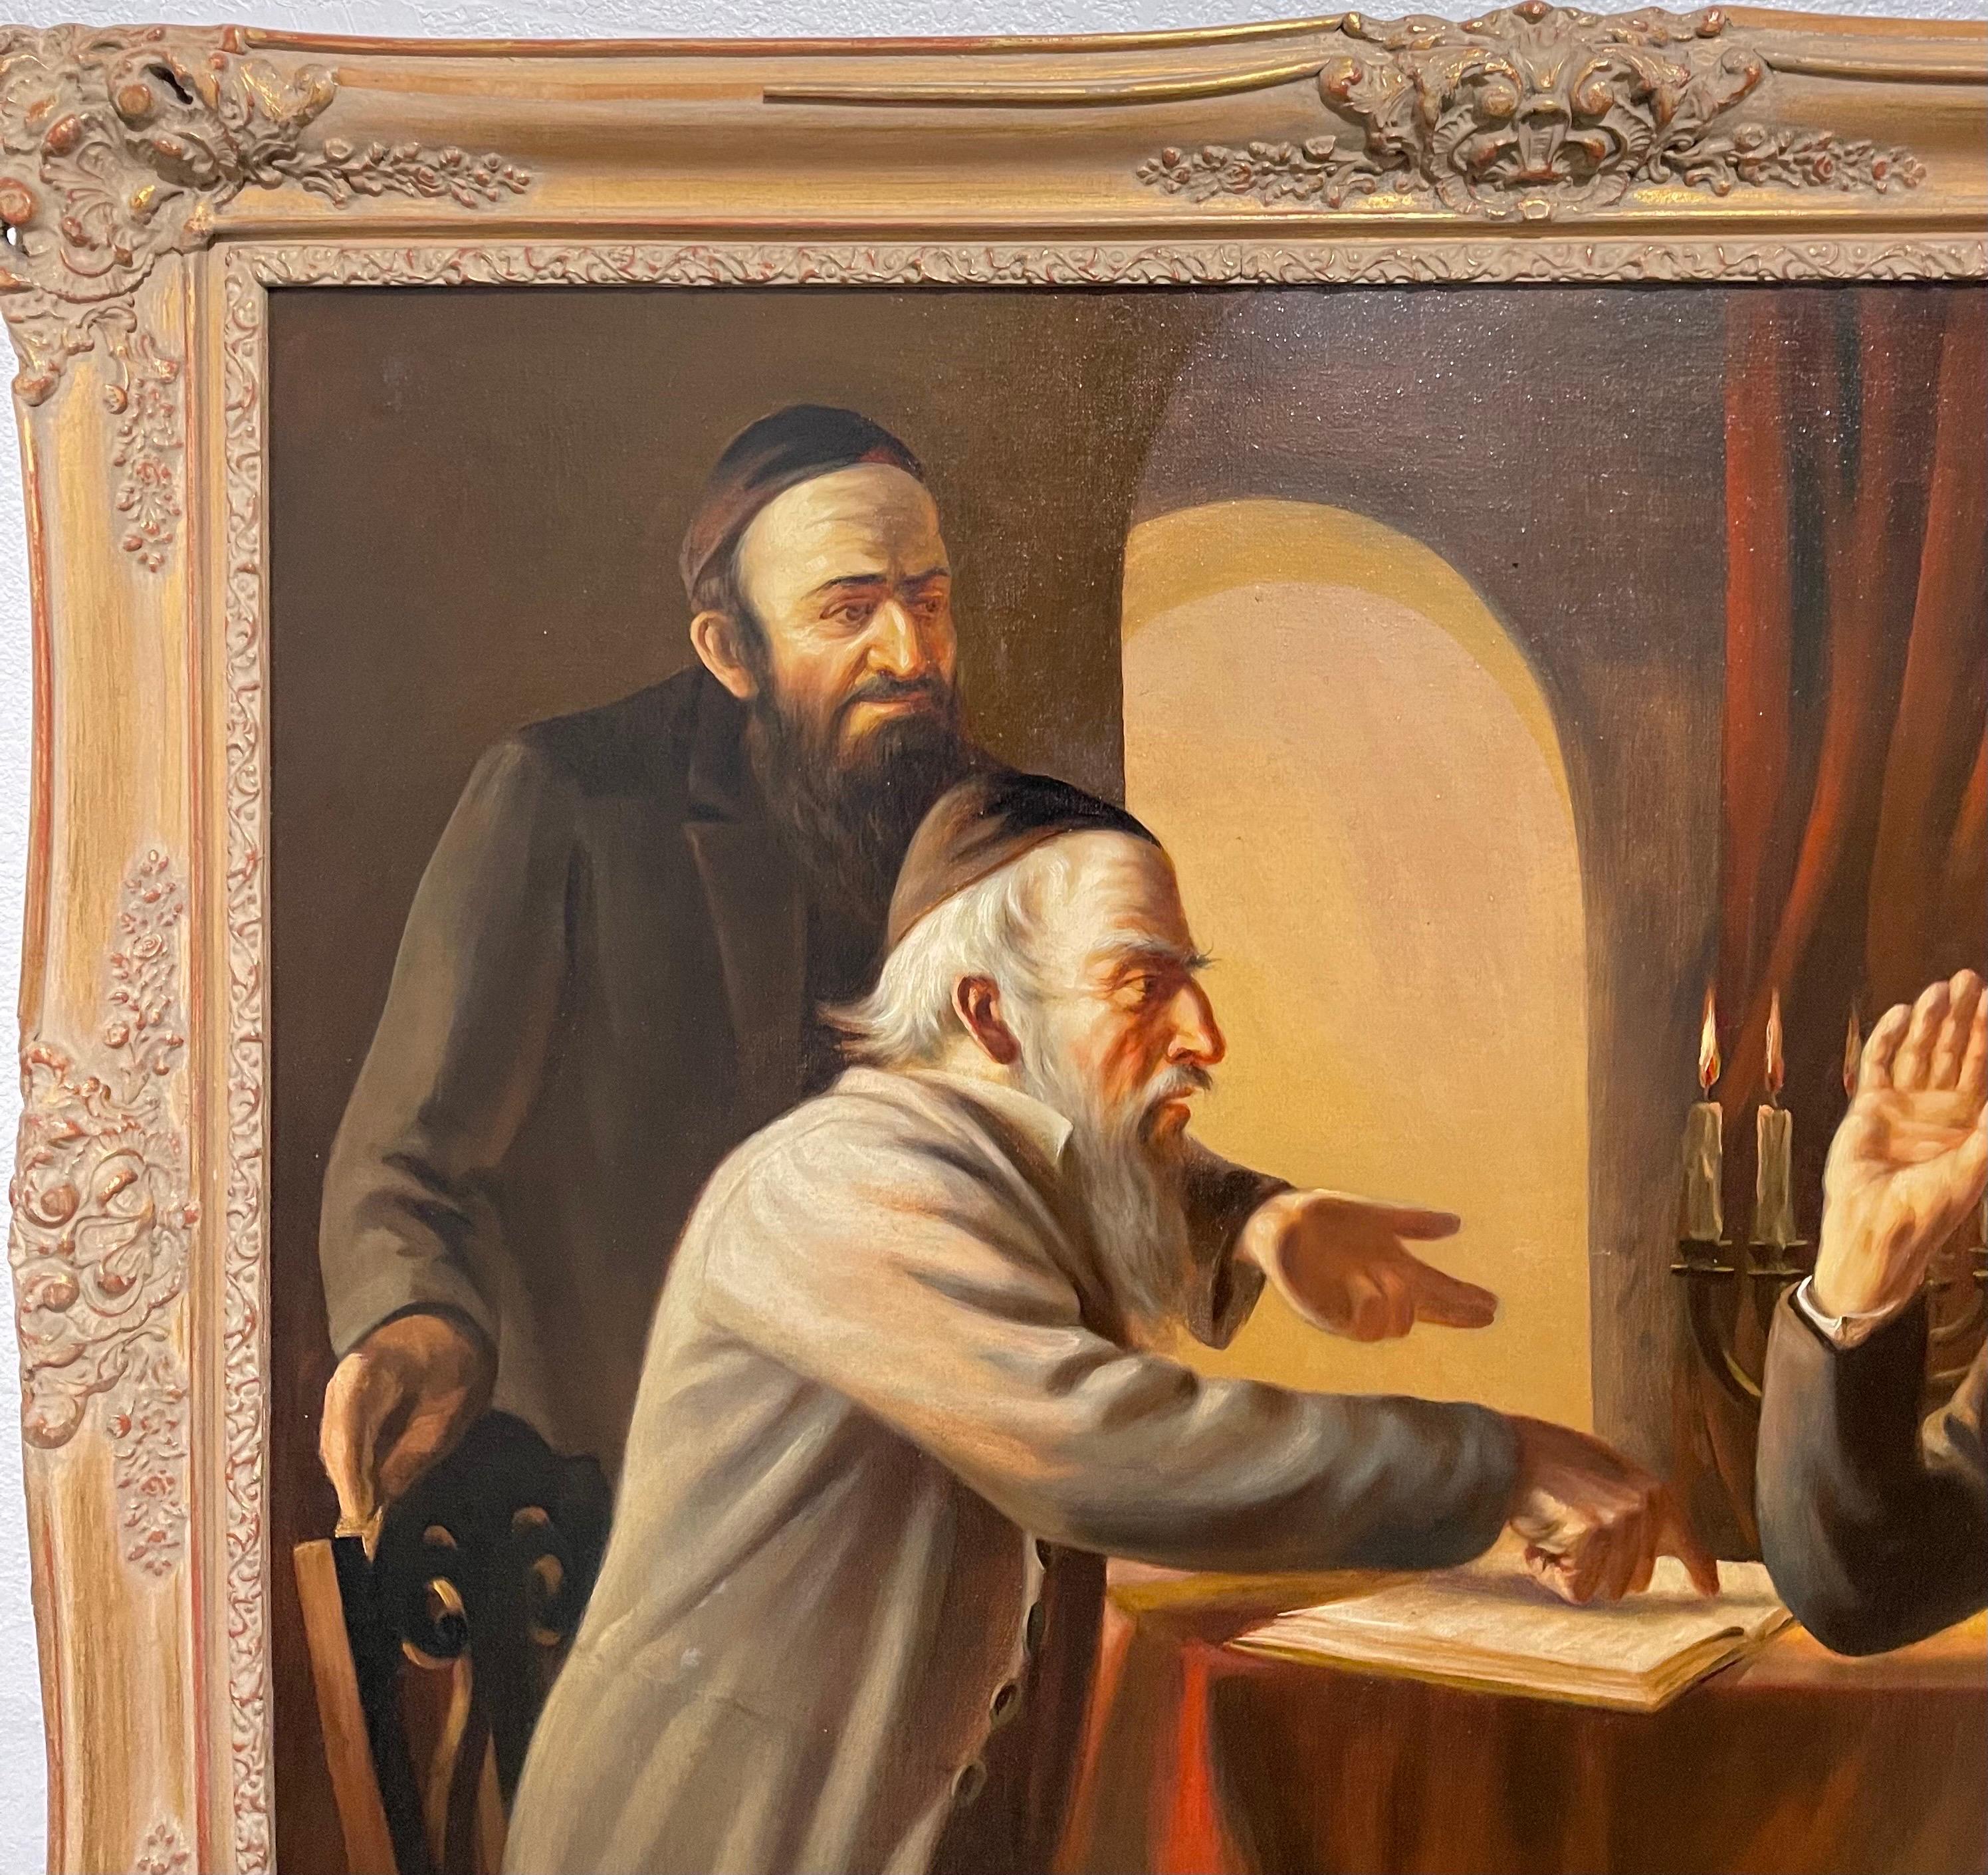 Framed 33 X 42, sight 28 X 37

This is a classic Judaic painting of a Jewish genre scene of a rabbinical debate or rabbis studying talmud. It is not dated. It is signed lower right but i cannot make out the name. I am unsure if this is from the USA,